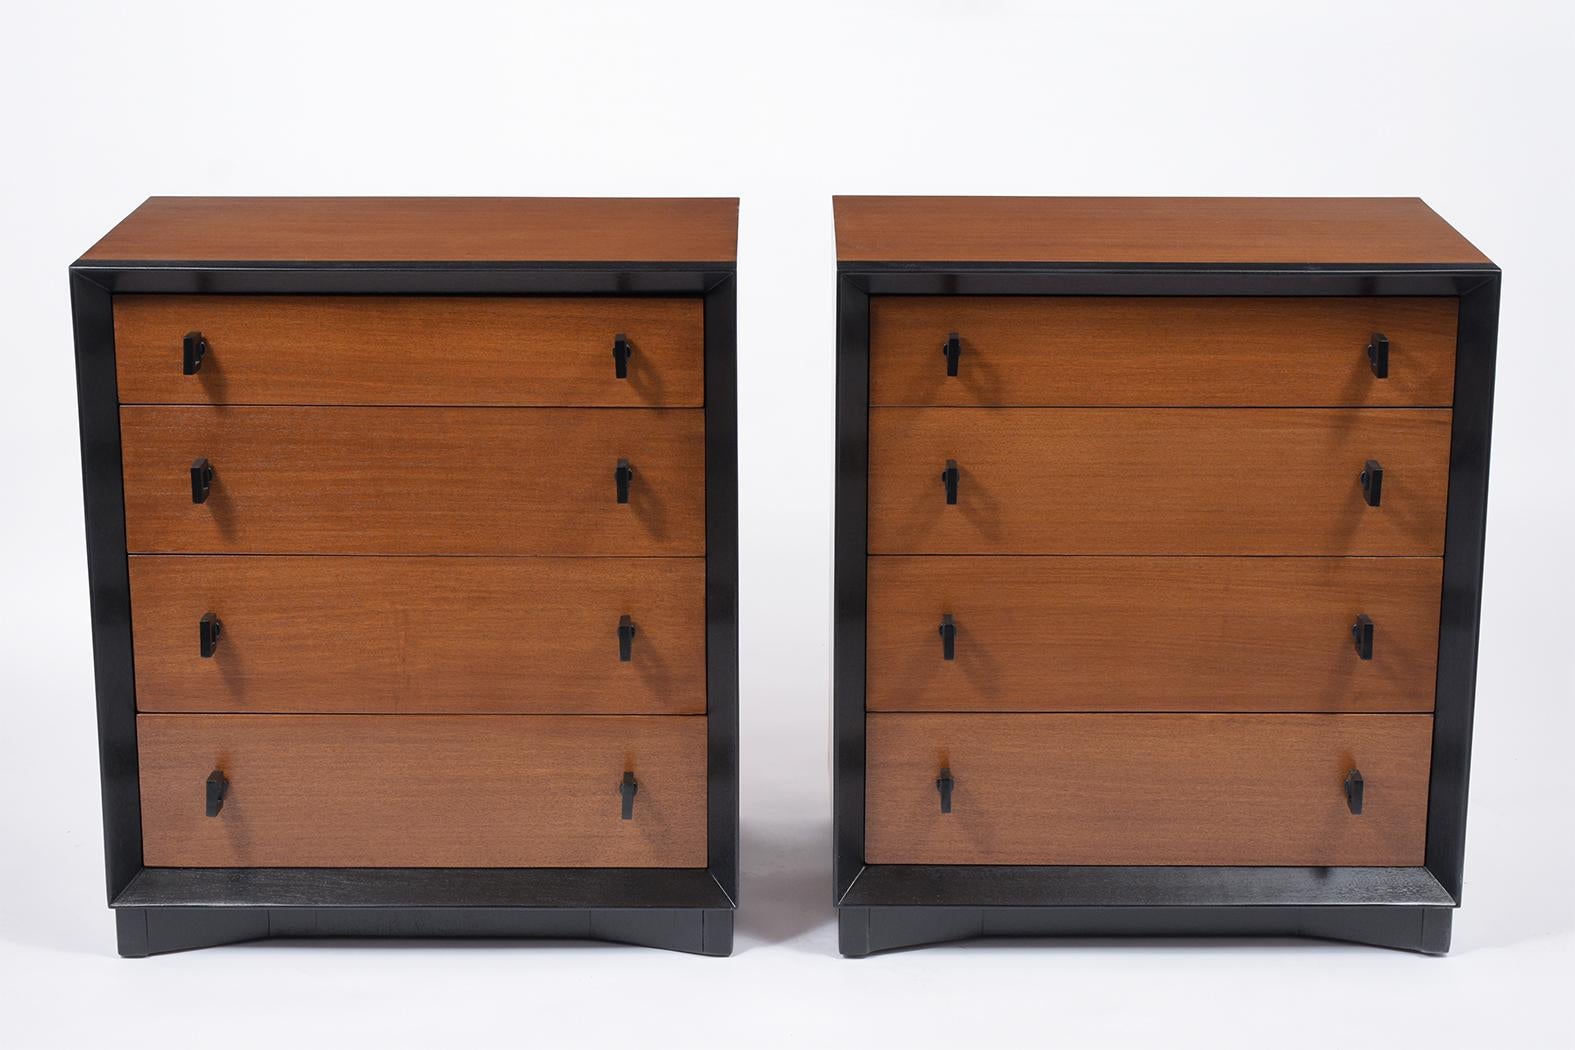 An extraordinary pair of midcentury chest of drawers in the manner of Paul Frankl handcrafted out of mahogany wood and features mahogany and ebonized color combinations with a lacquered finish. The chest comes with four drawers each with two